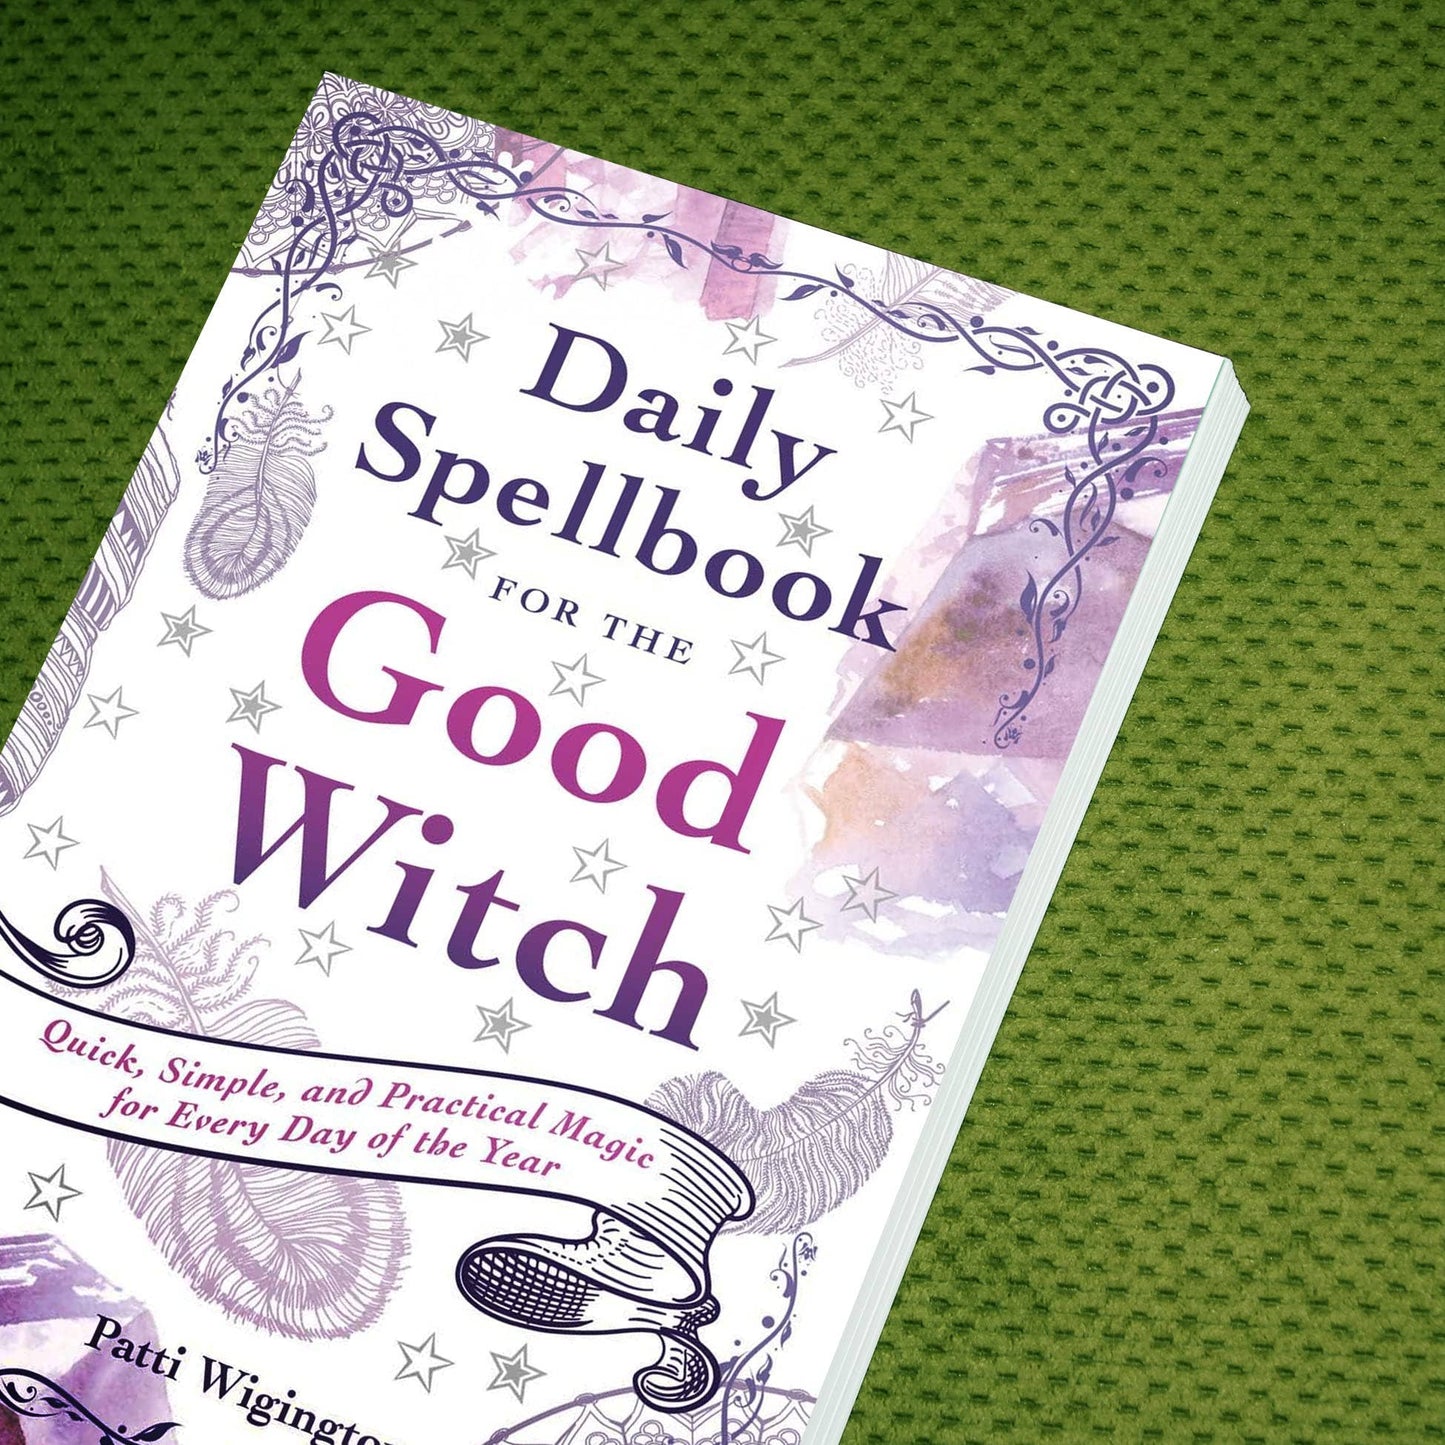 Daily Spellbook for the Good Witch by Patti Wigington